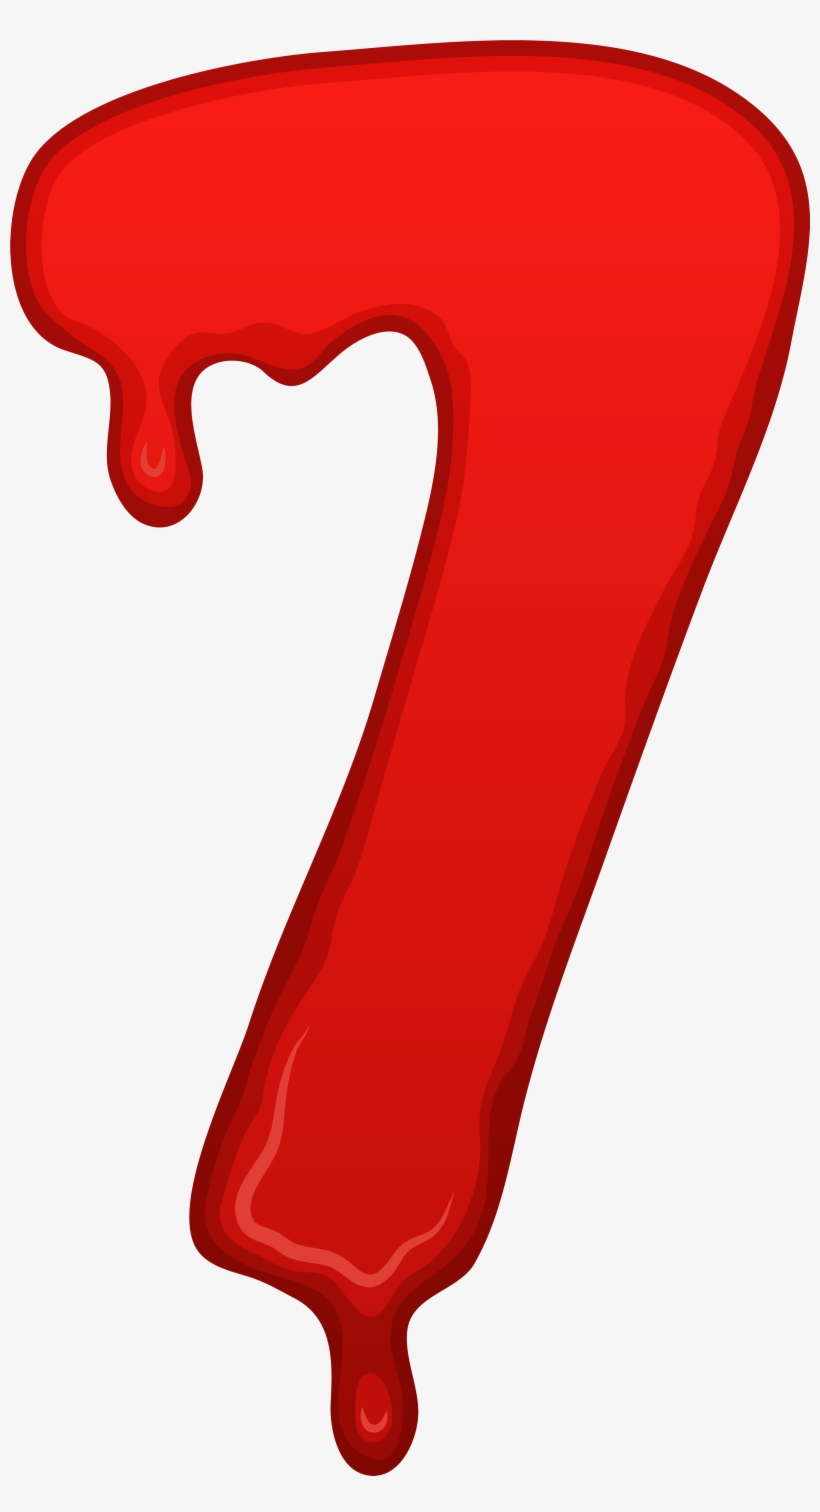 Bloody Numbers Png, transparent png #2408634